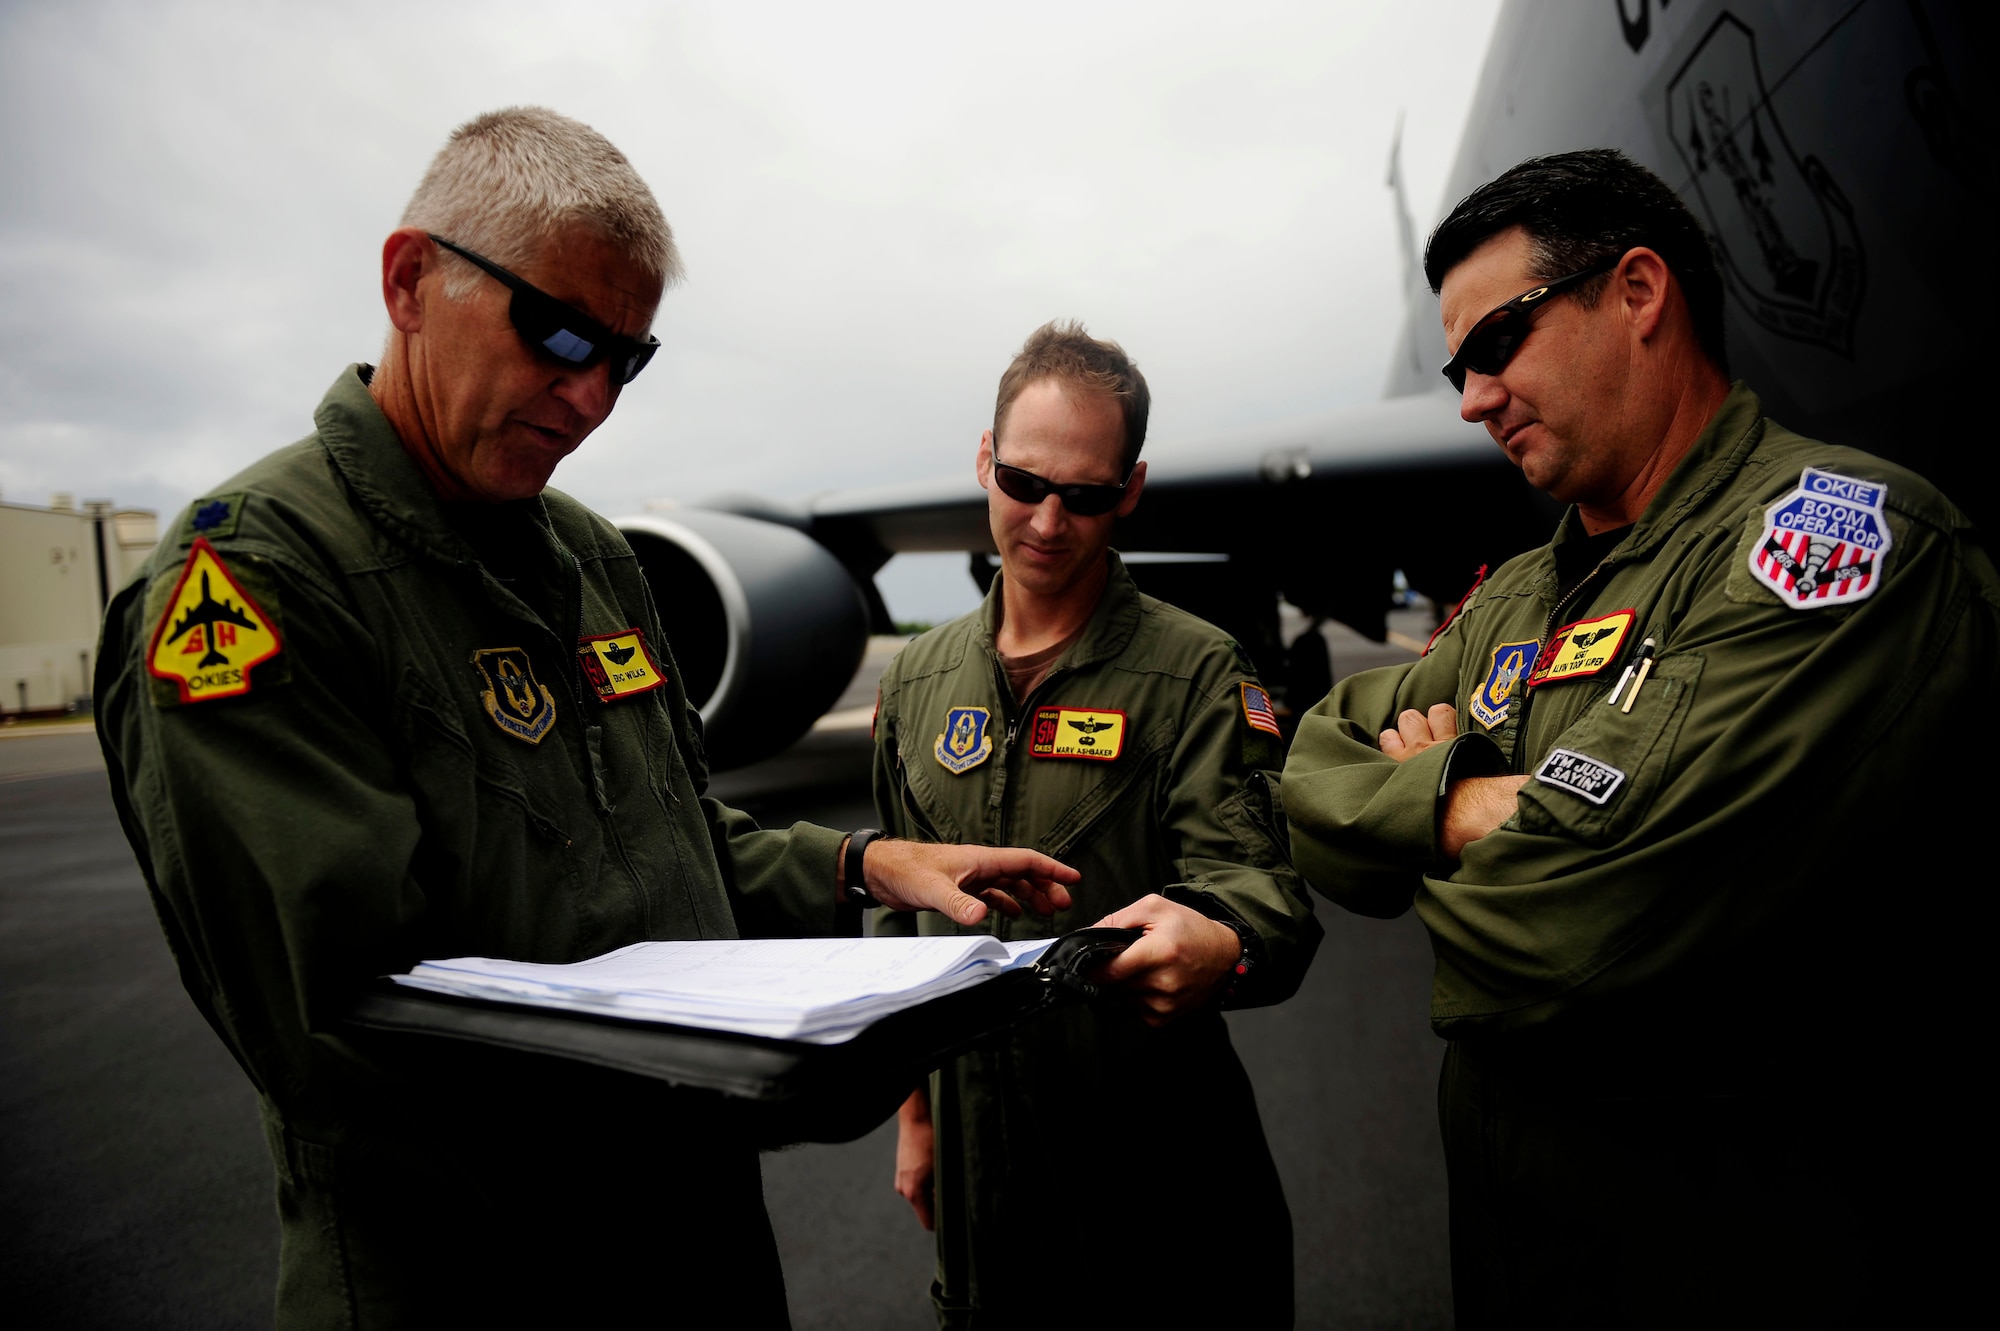 U.S. Air Force Lt. Col. Eric Wilks, left, and Lt. Col. Marv Ashbaker, center, and Master Sgt. Alvin Kuger, assigned to the 465th Air Refueling Squadron, Tinker Air Force Base, Okla., coordinate for a refueling mission in support of exercise Rim of the Pacific (RIMPAC) at Hickam Air Force Base, Hawaii, on July 8, 2010.  RIMPAC 2010 is the 22nd in a series of significant international combined/joint military exercises scheduled biennially by U.S. Pacific Fleet and takes place in the Hawaiian operating area.  RIMPAC training operations include participation by more than 14 nations, 34 ships, five submarines, more than 100 aircraft, and more than 20,000 Soldiers, Sailors, Marines and Airmen.  Multilateral exercises such as RIMPAC enhance cooperation between partnering nations and provides a unique opportunity to practice the abilities to plan, communicate, and execute operations.  (U.S. Air Force photo by Staff Sgt. Kamaile O. Long/Released)